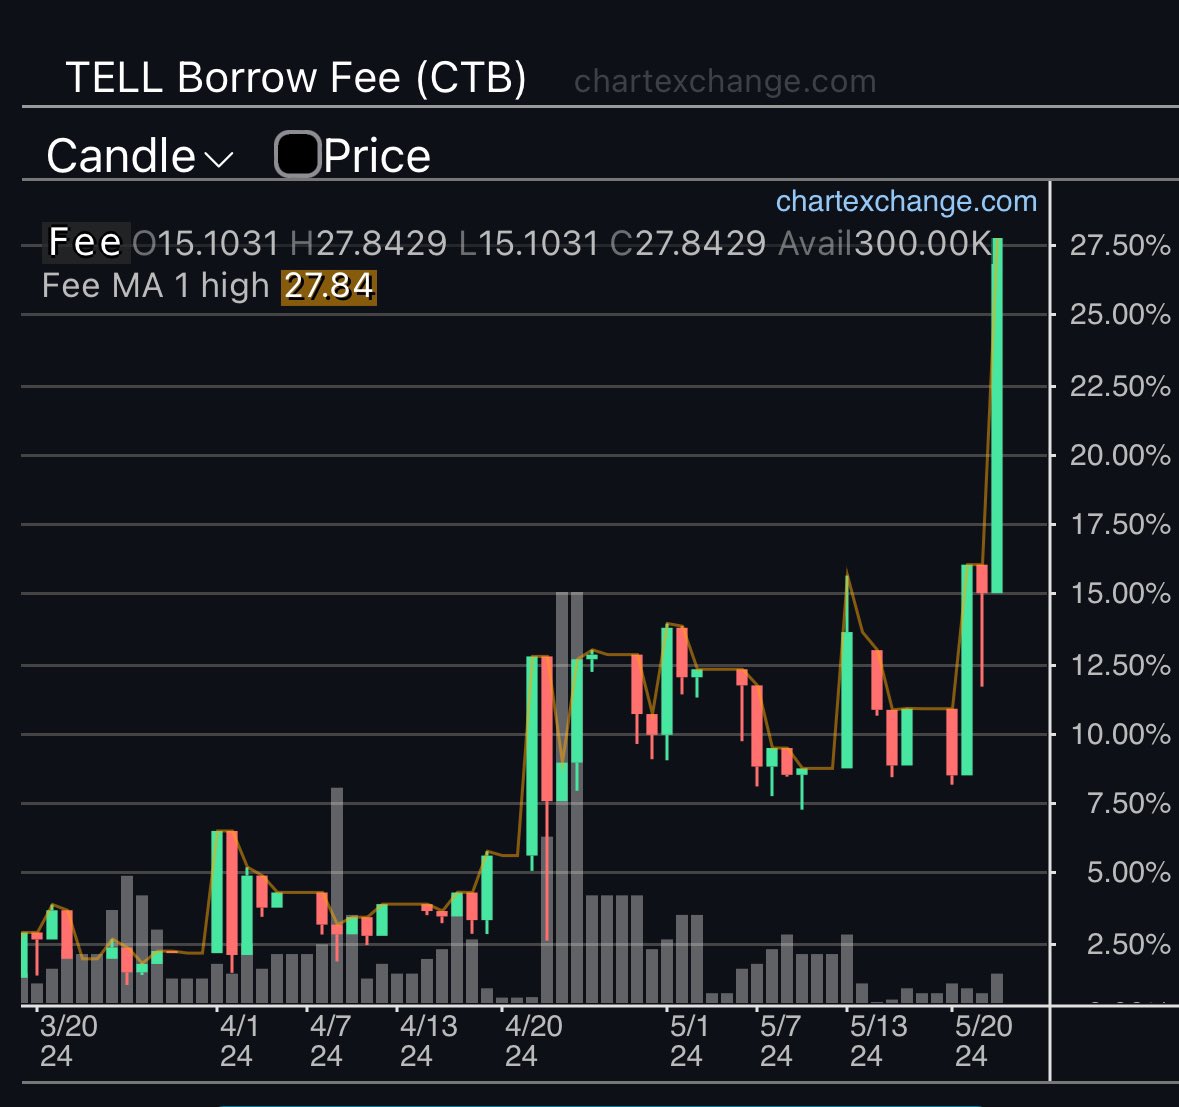 👀 Keep an eye on the $TELL borrow fees which have exploded to all time highs while short interest is also at all time highs.